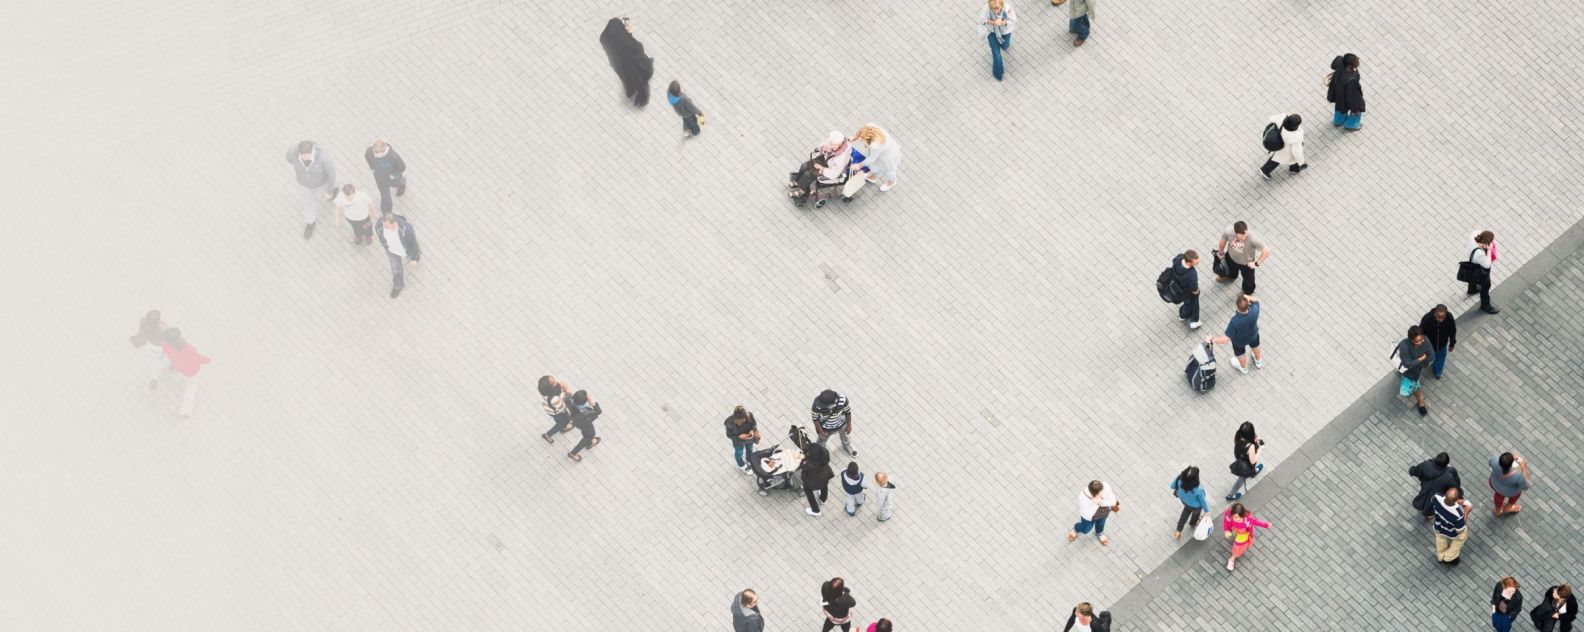 overhead view of pedestrians in a city